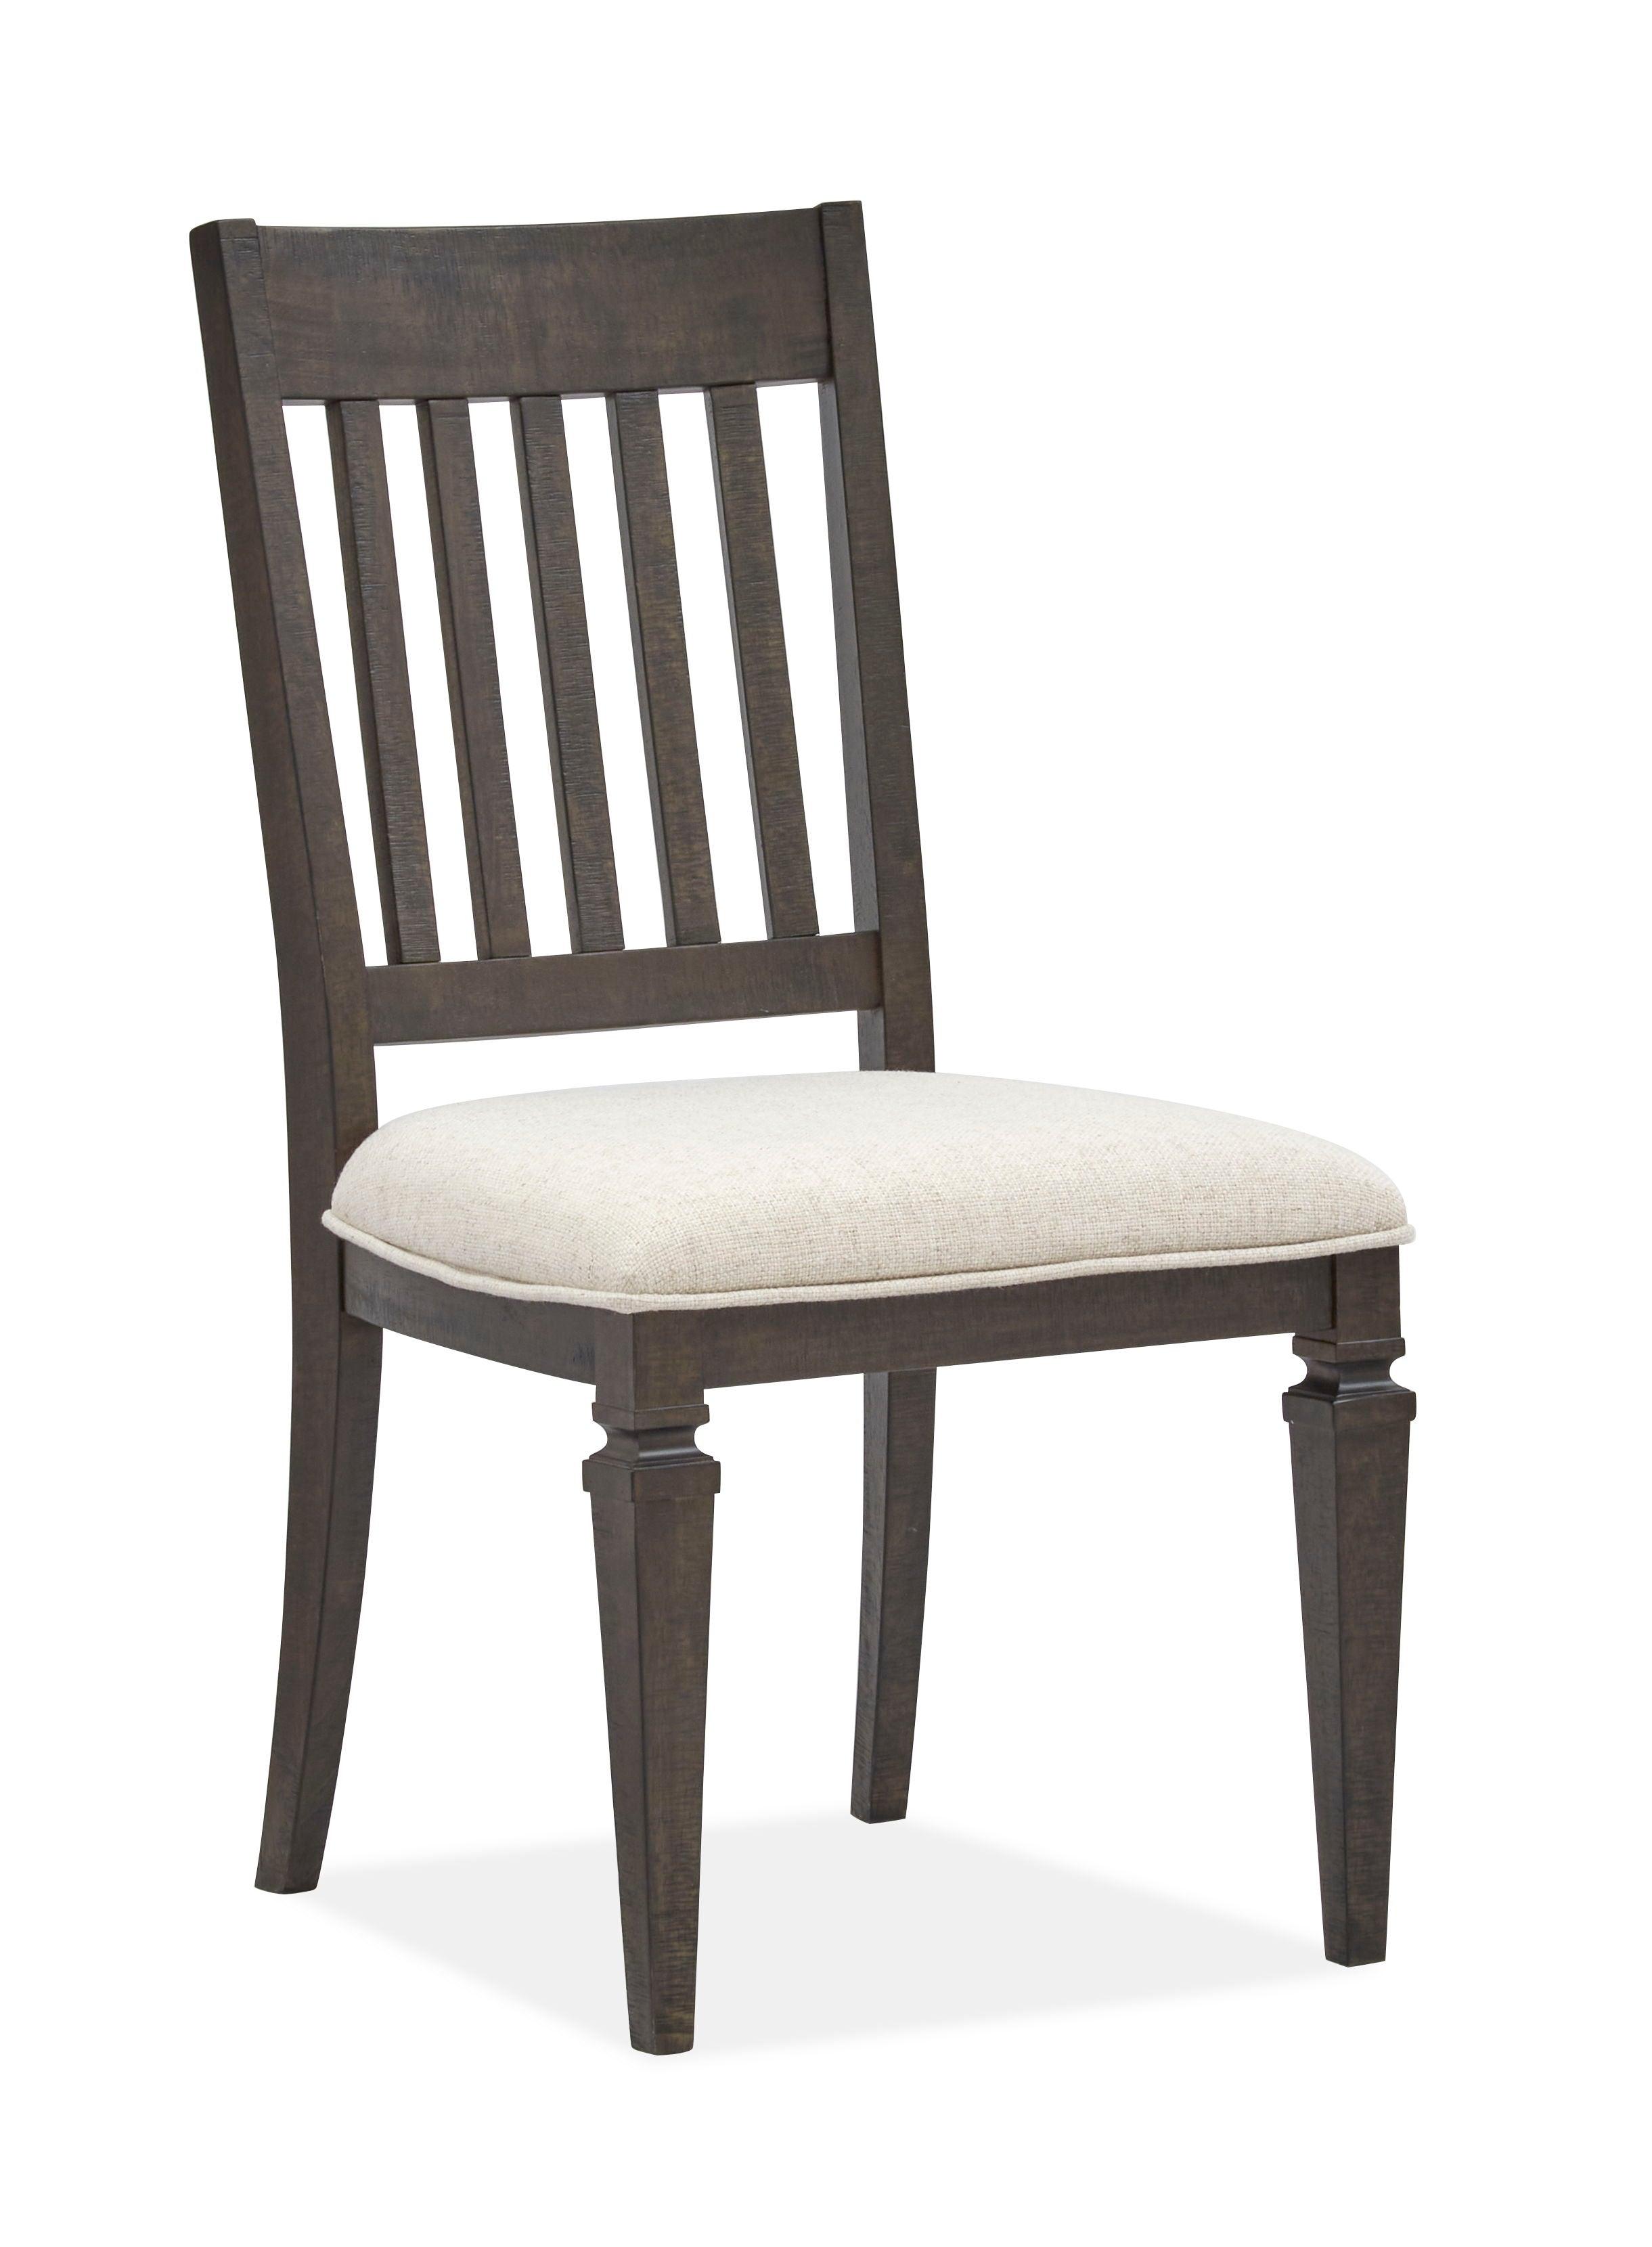 Magnussen Furniture - Calistoga - Dining Side Chair With Upholstered Seat (Set of 2) - Weathered Charcoal - 5th Avenue Furniture